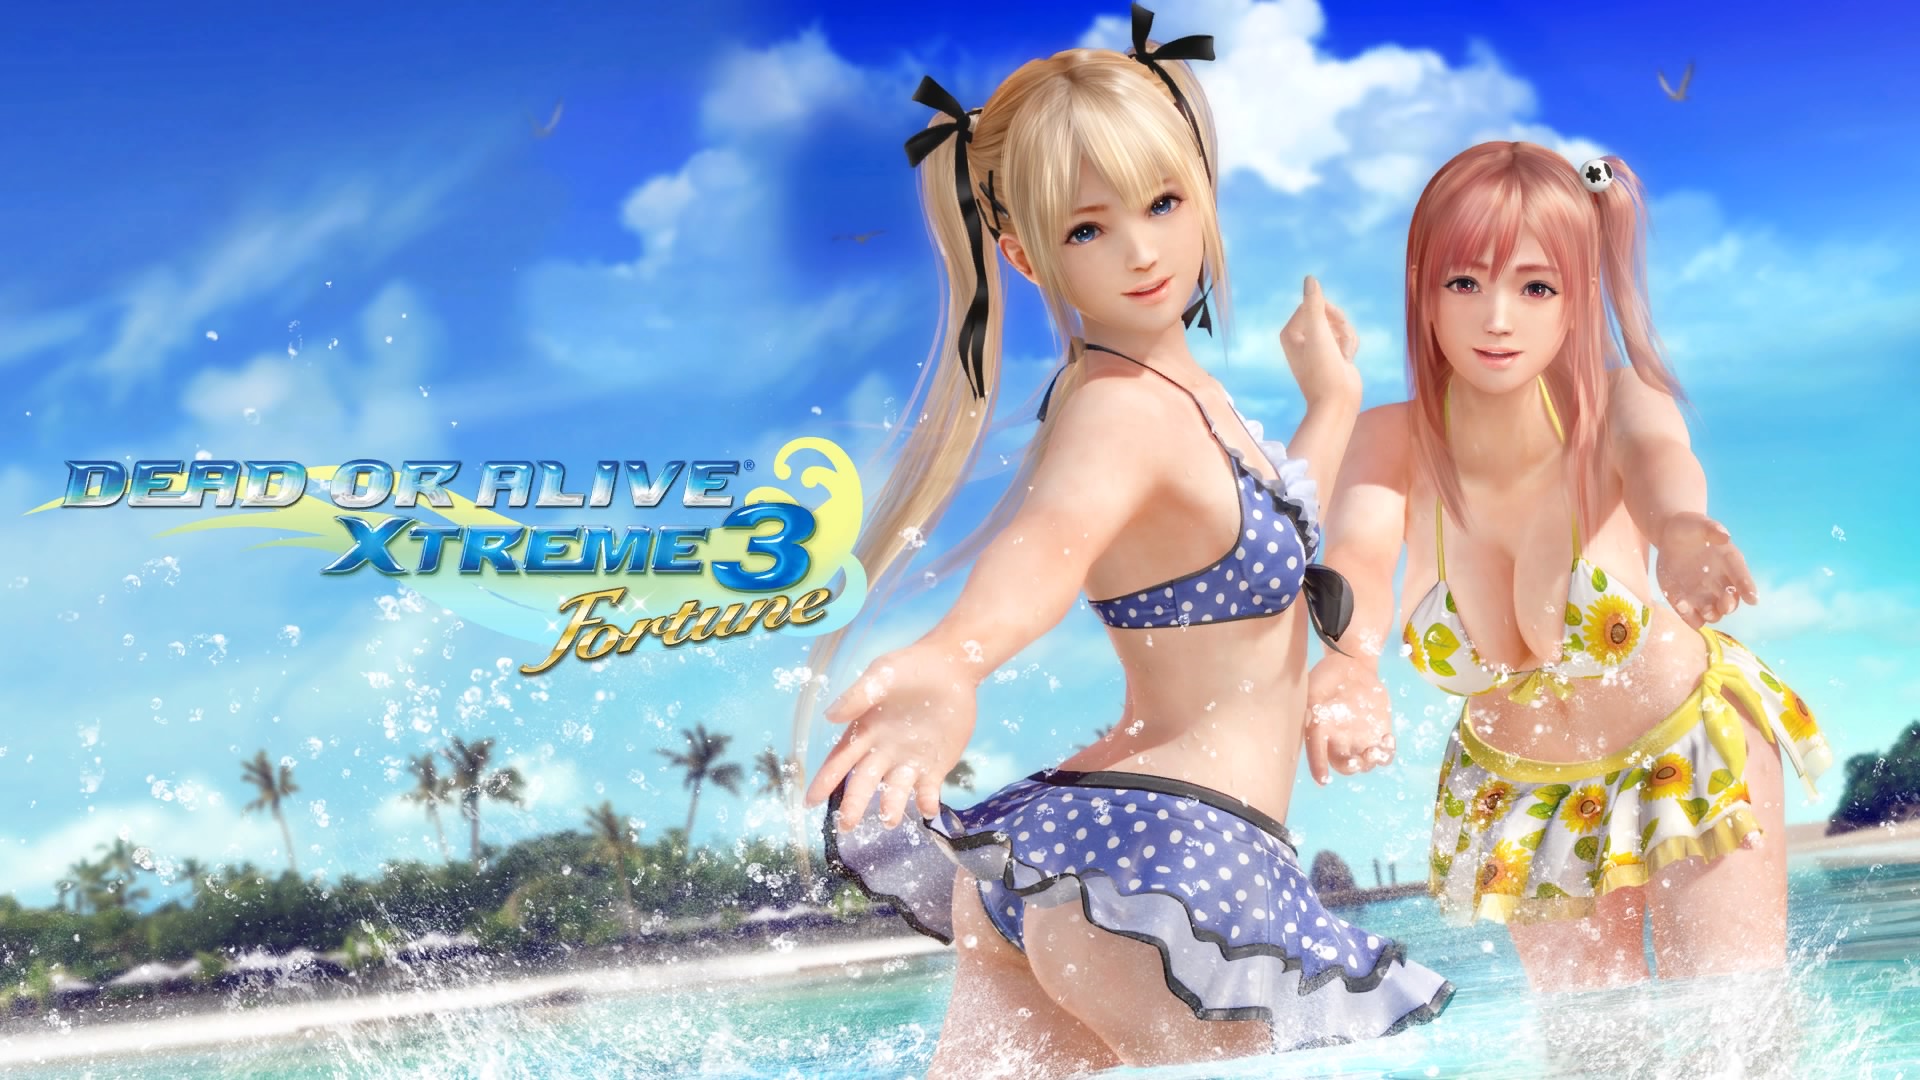 dead-or-alive-xtreme-3-fortune-cover-art-by-nebakanezr-on-deviantart